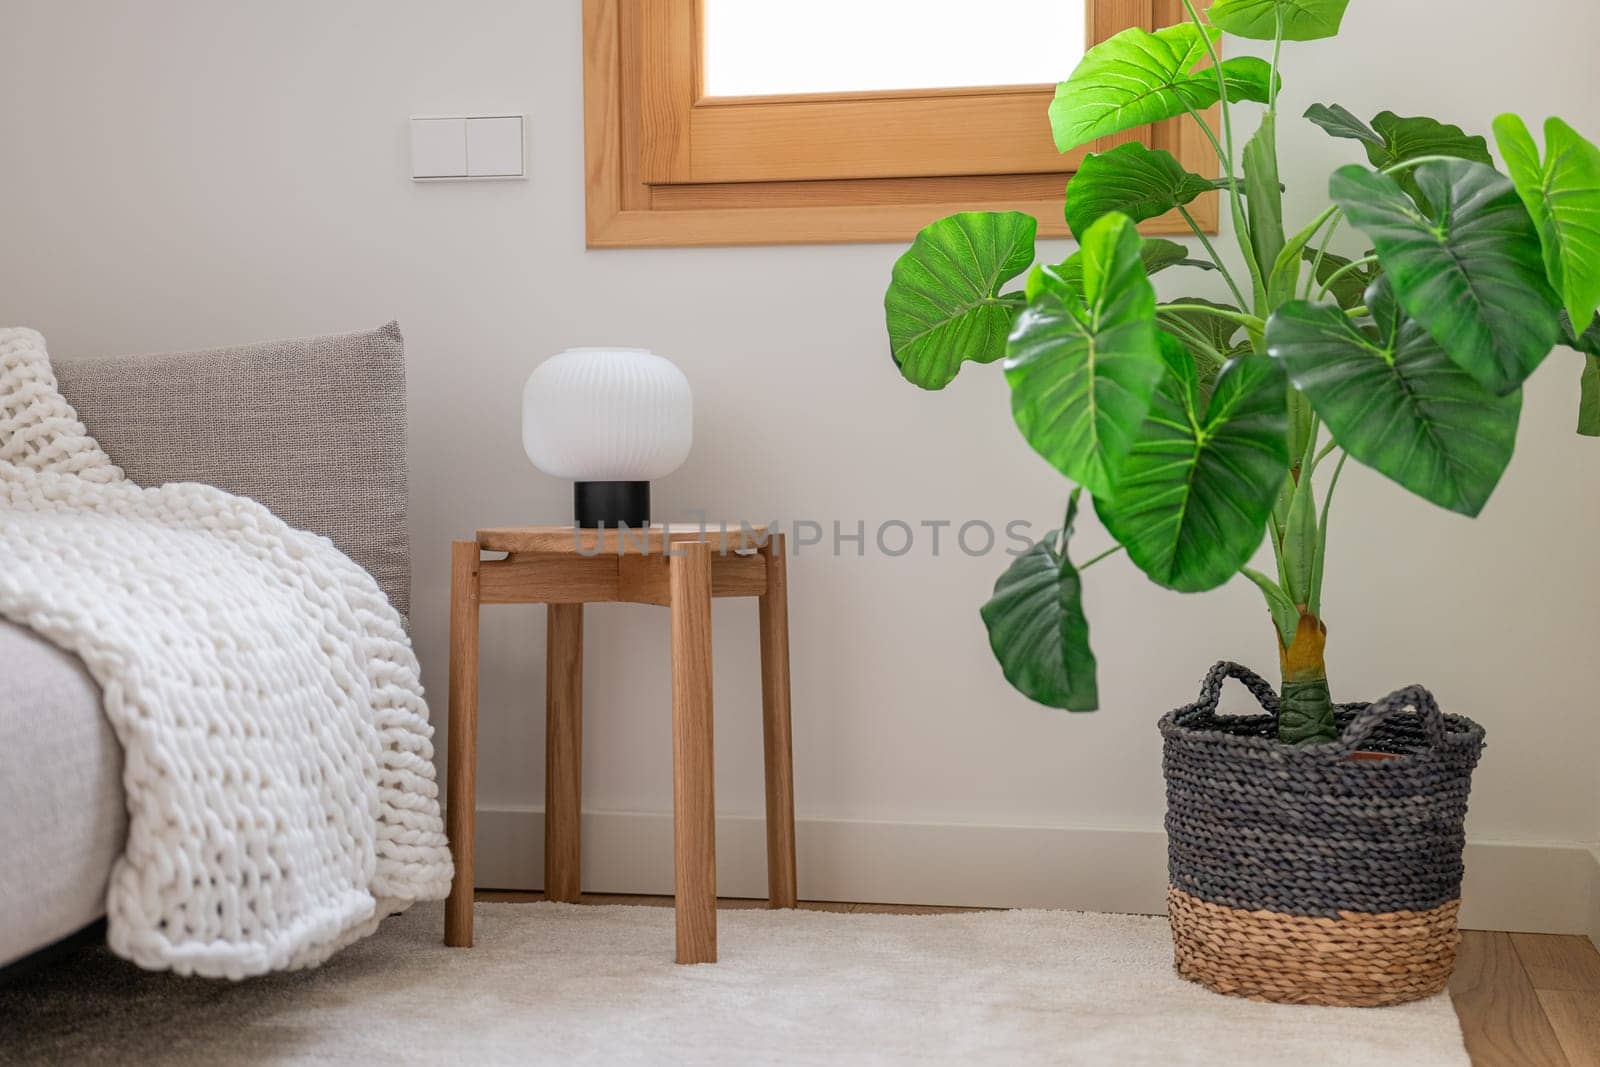 Pot with flower on floor of bedroom next to stool with light by apavlin